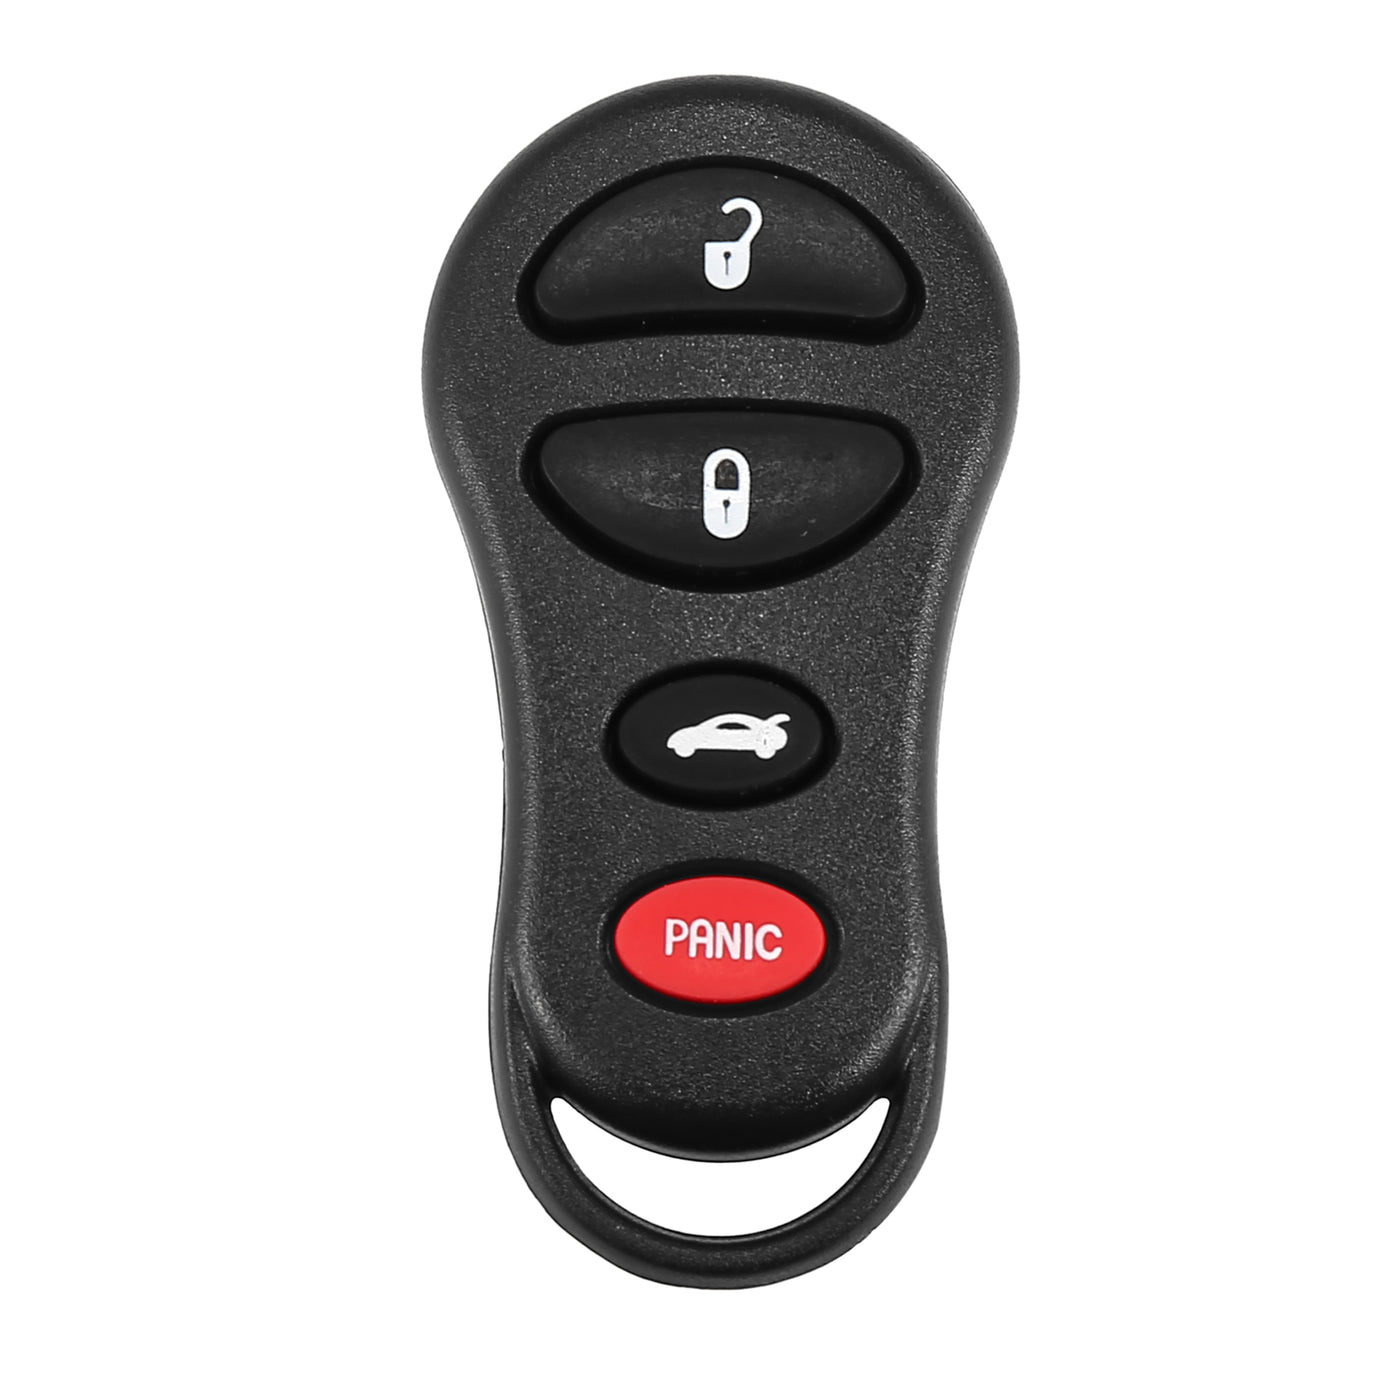 X AUTOHAUX GQ43VT17T 315MHz Replacement Keyless Entry Remote Car Key Fob for Jeep Liberty 02-04 for Dodge Stratus 01-06 for Dodge Intrepid 2001-2005 for Chrysler Concorde 2001--2004 4 Button